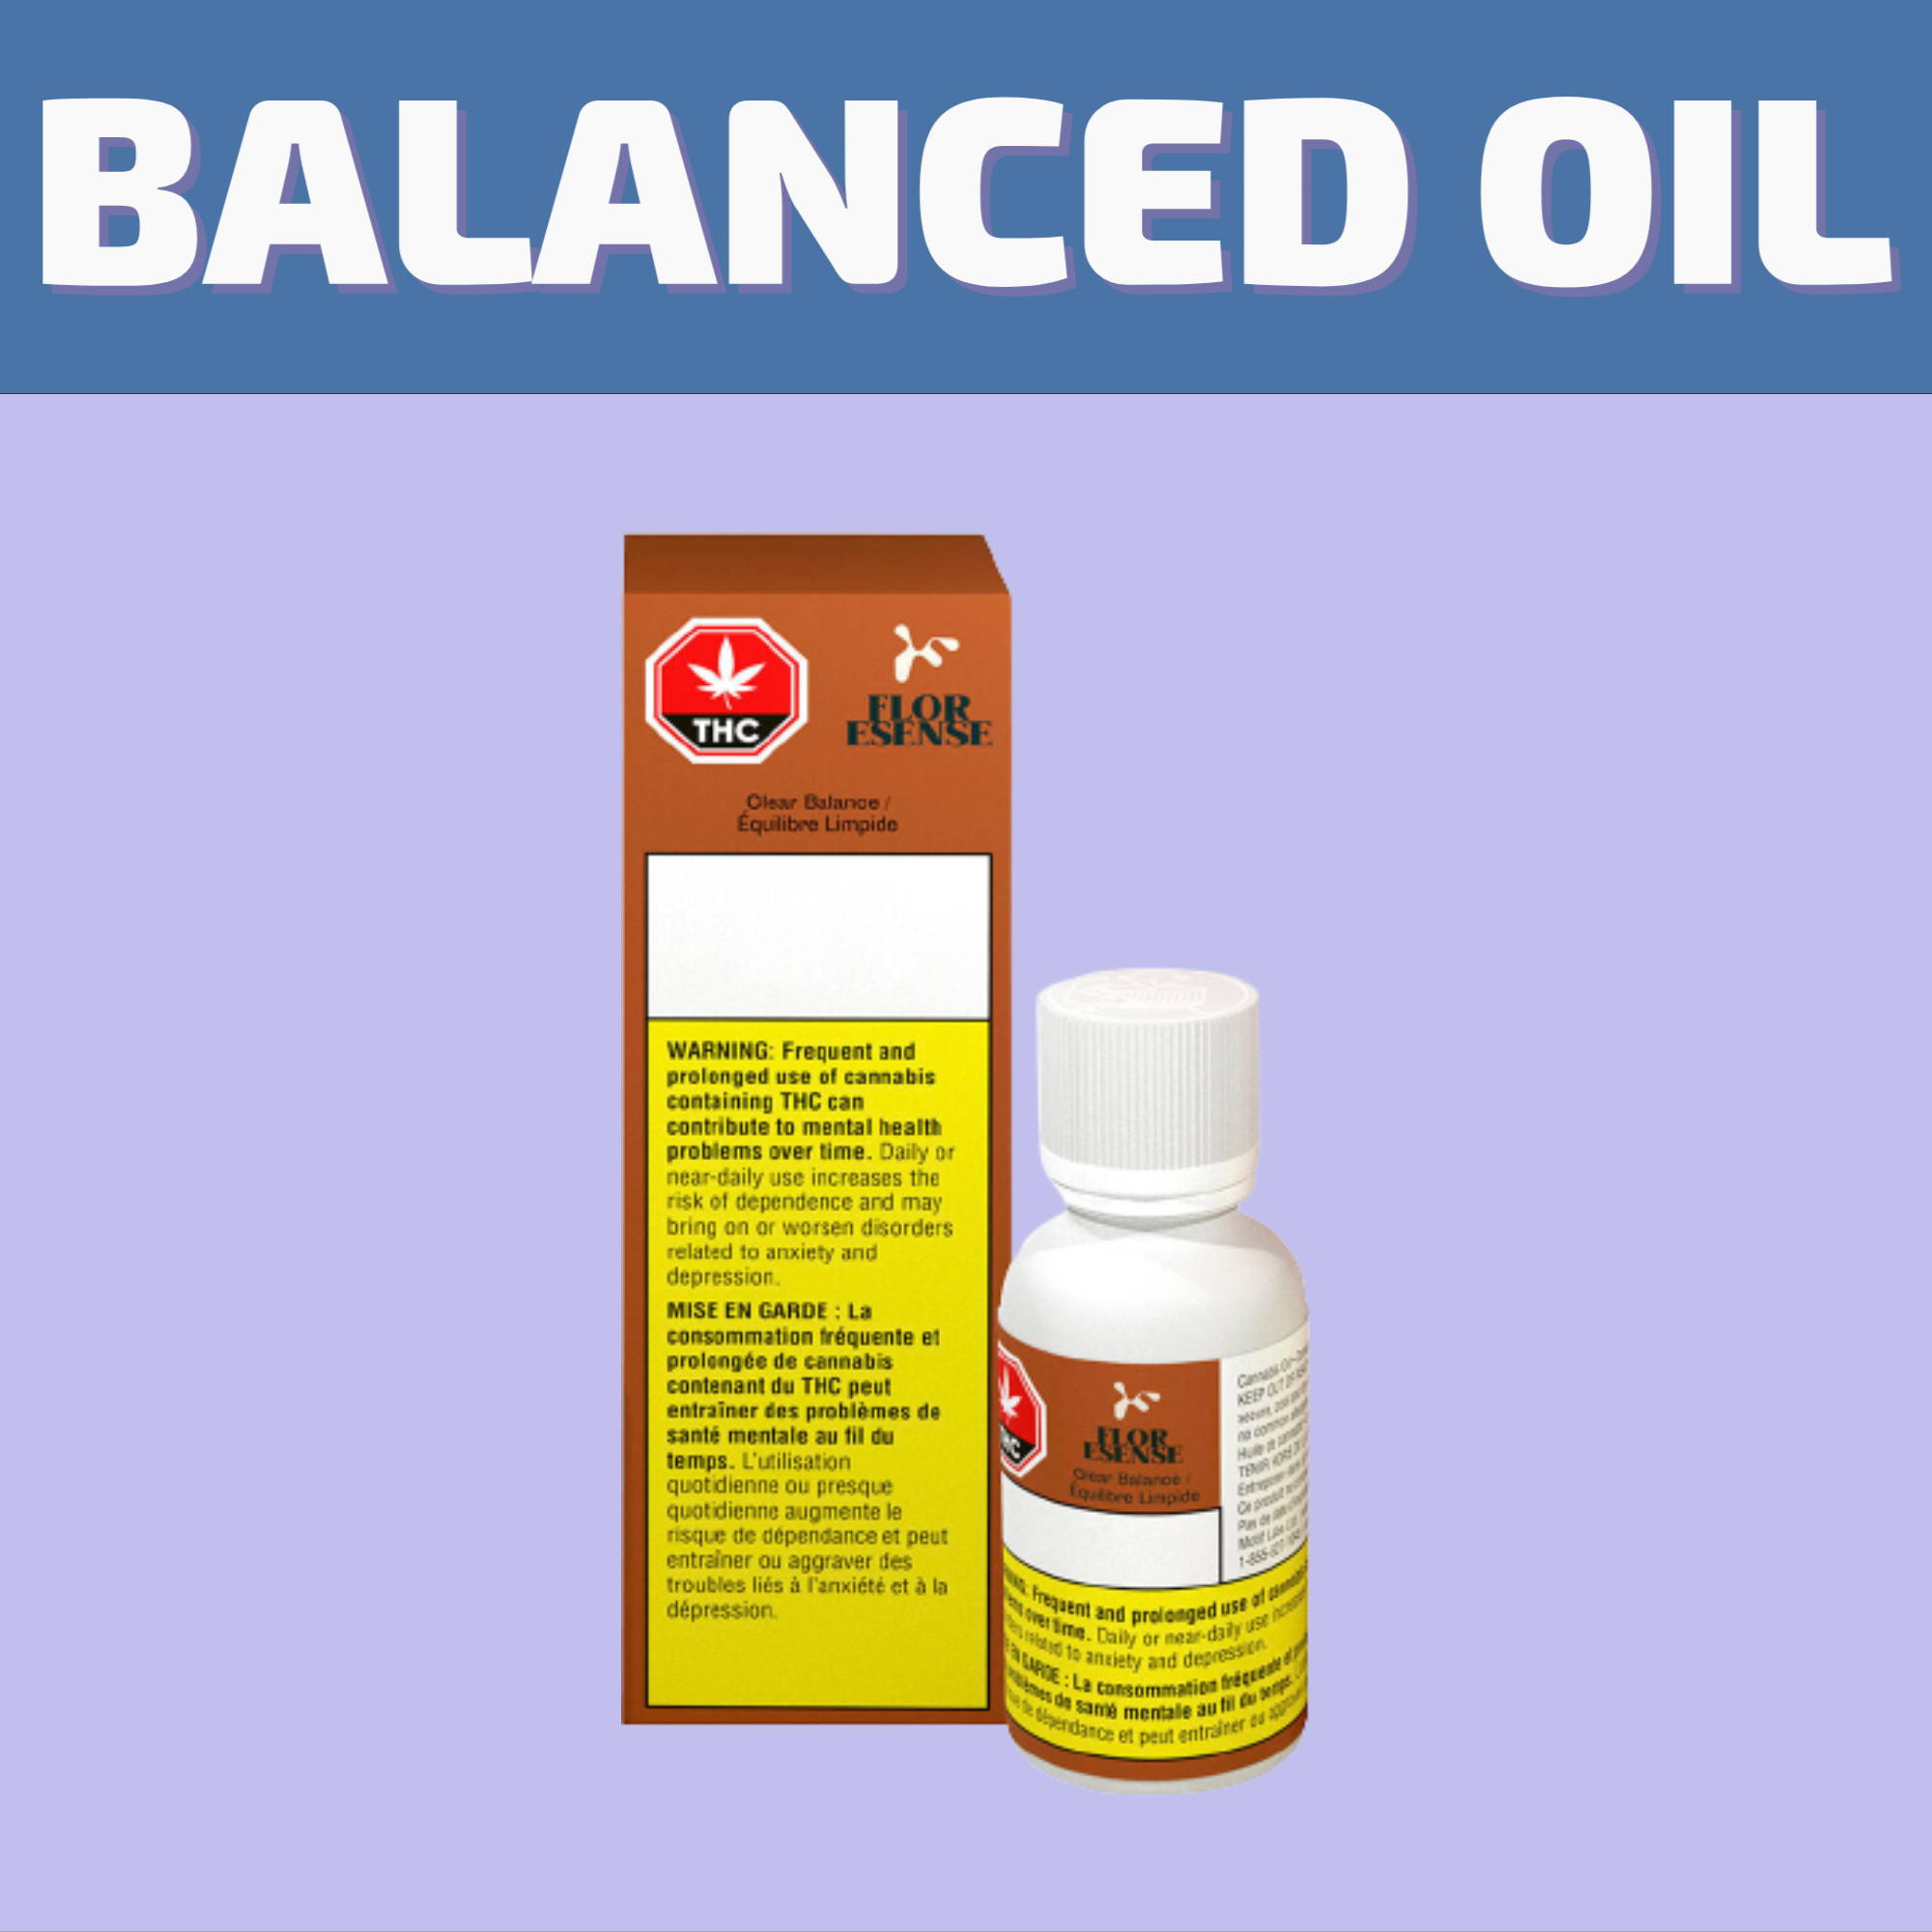 Shop our selection of Balanced Oils online for same day delivery or visit our dispensary on 580 Academy Road in Winnipeg. 